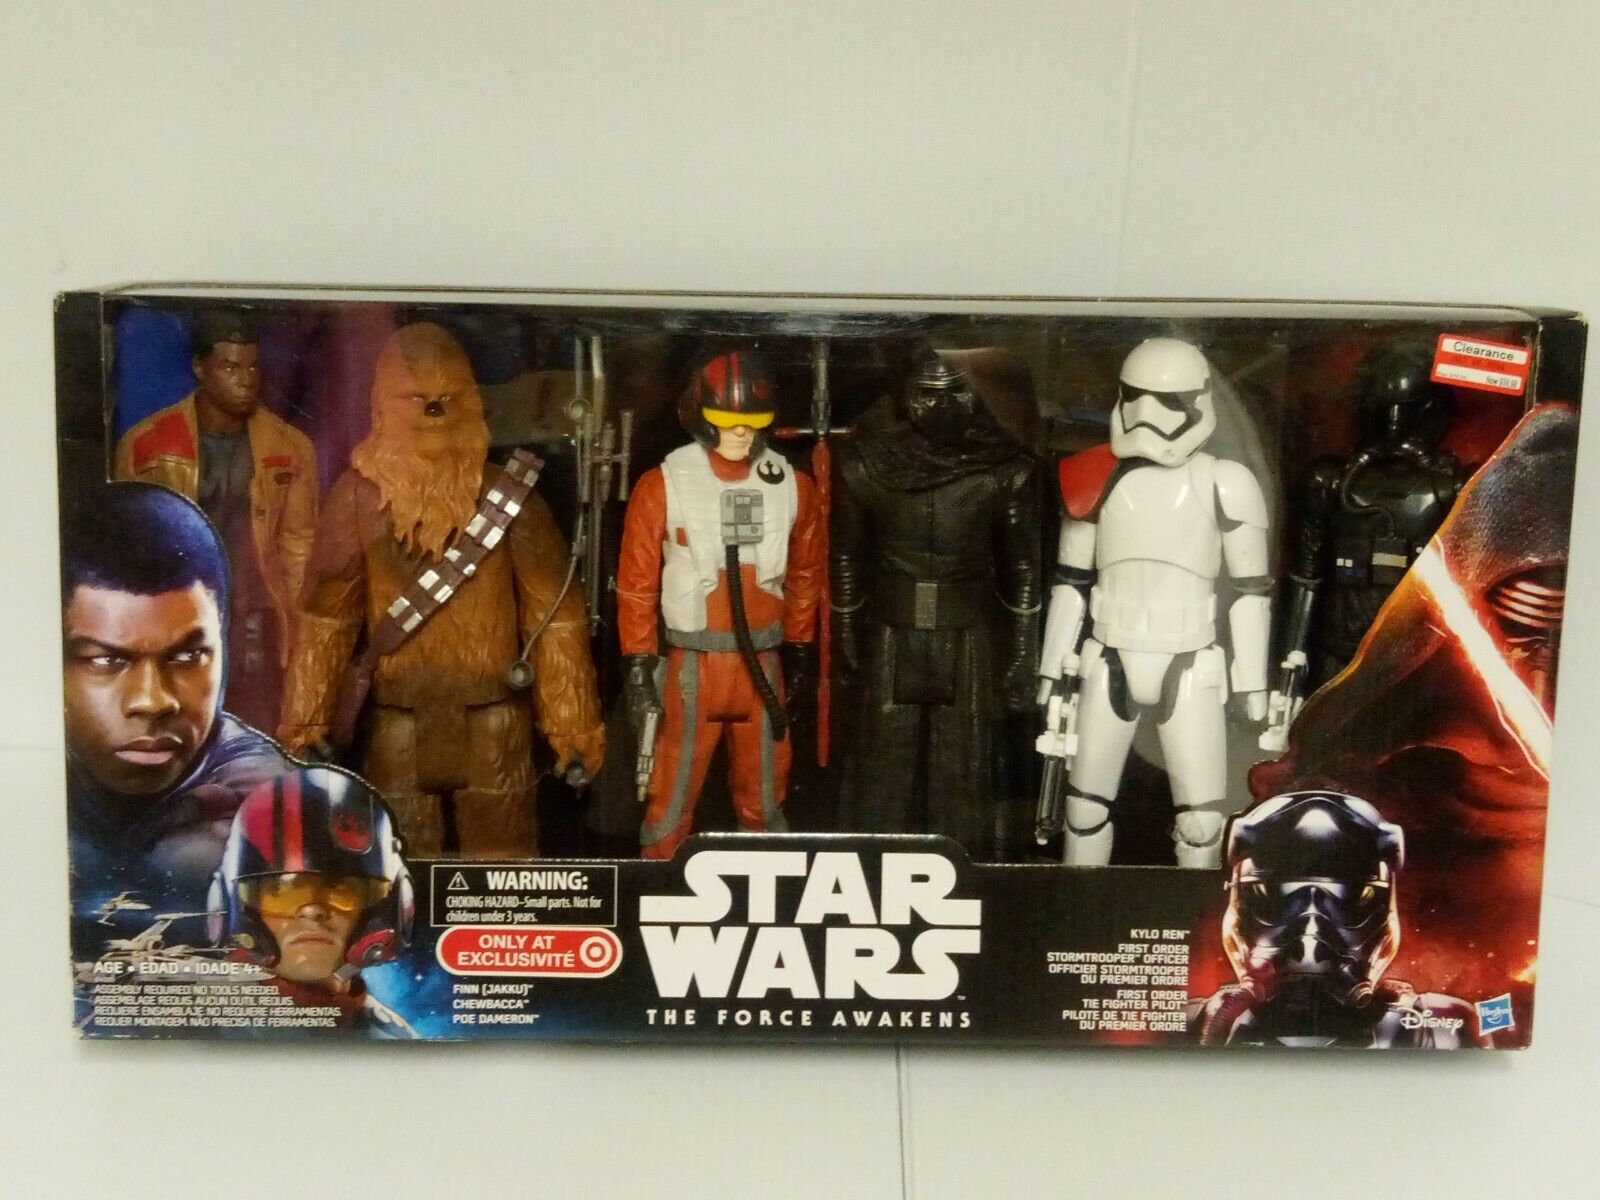 Star Wars The Force Awakens 12" Action Figures Target Exclusive Set of 6 NEW!